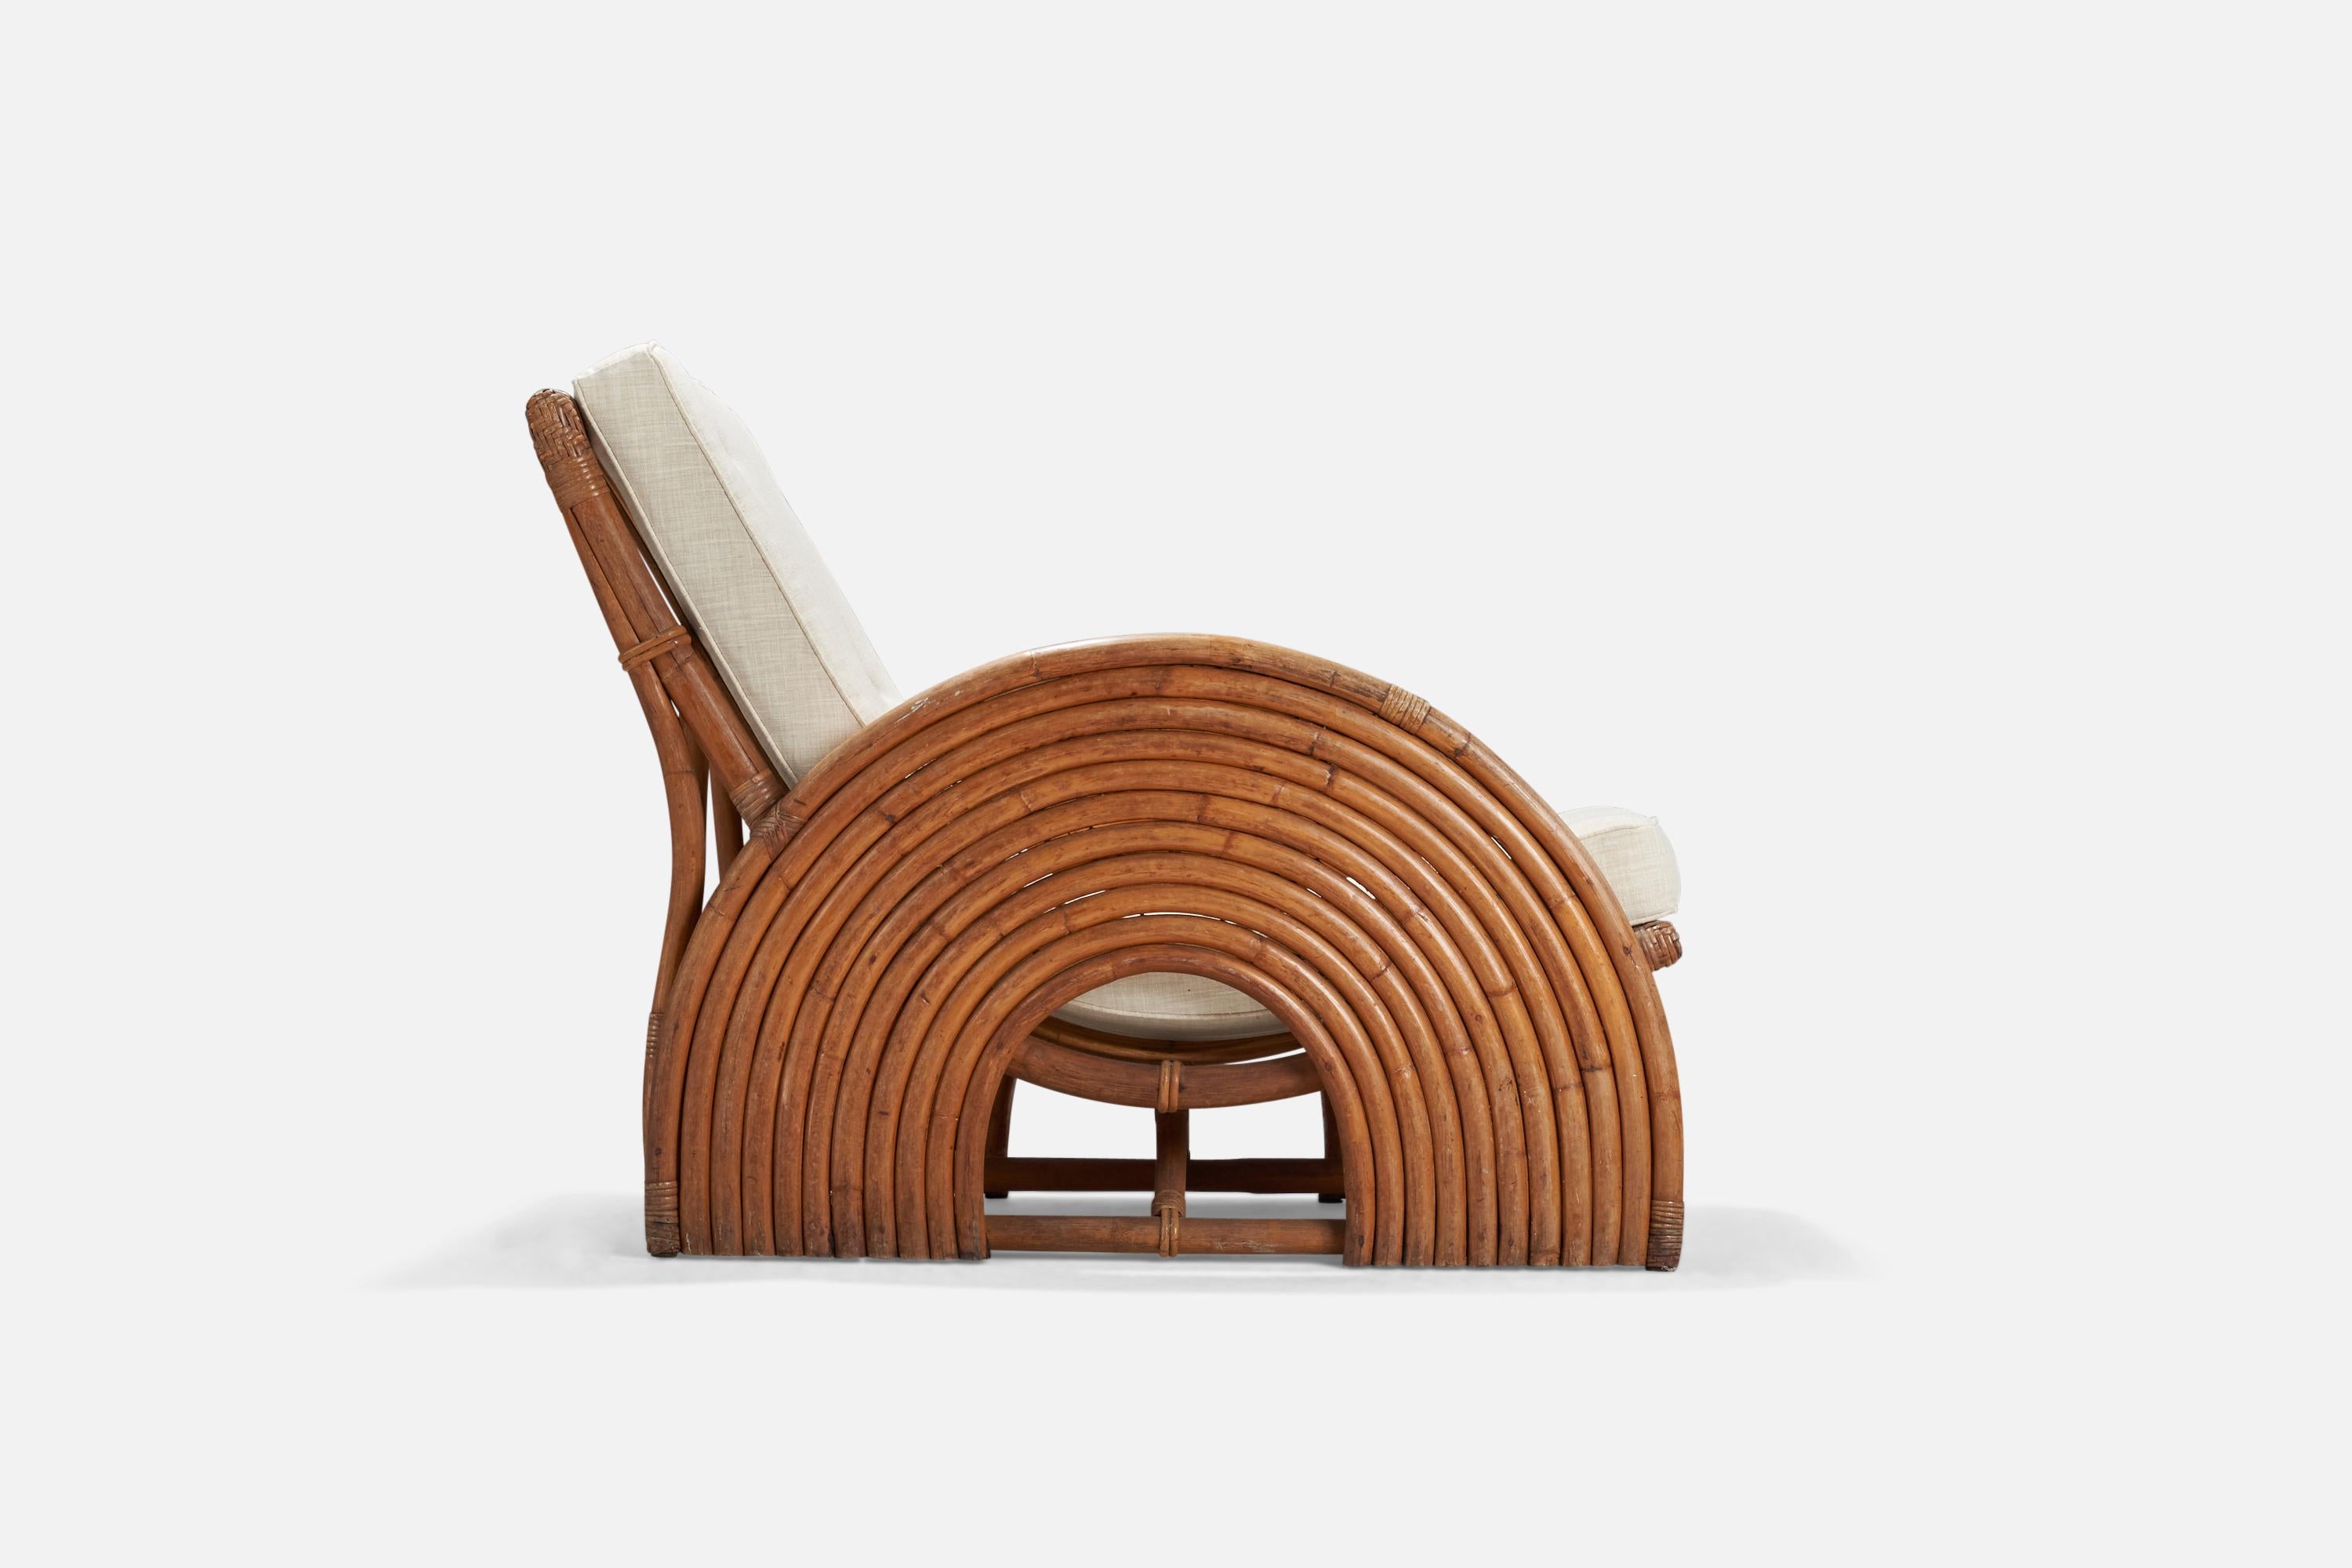 Mid-20th Century American Designer, Lounge Chair with Ottoman, Bamboo, Rattan, Fabric, USA, 1940s